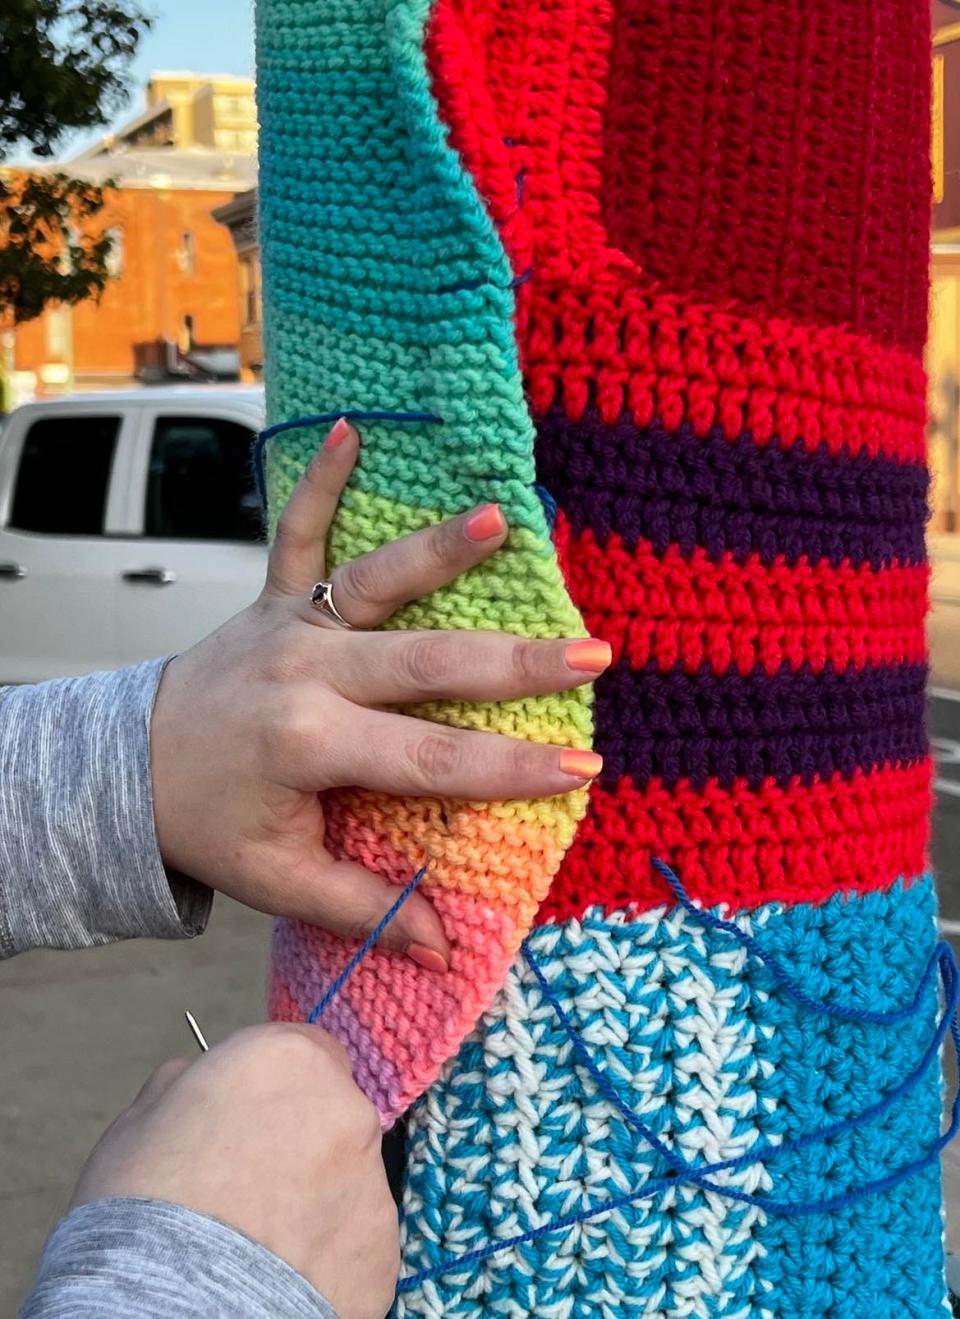 Volunteer Natalie Starn works on yarn art on Sixth Street NW in downtown Canton. A group of volunteers, headed by Vicki Boatright of BZTAT Studios, is installing the yarn pieces on poles and buildings.